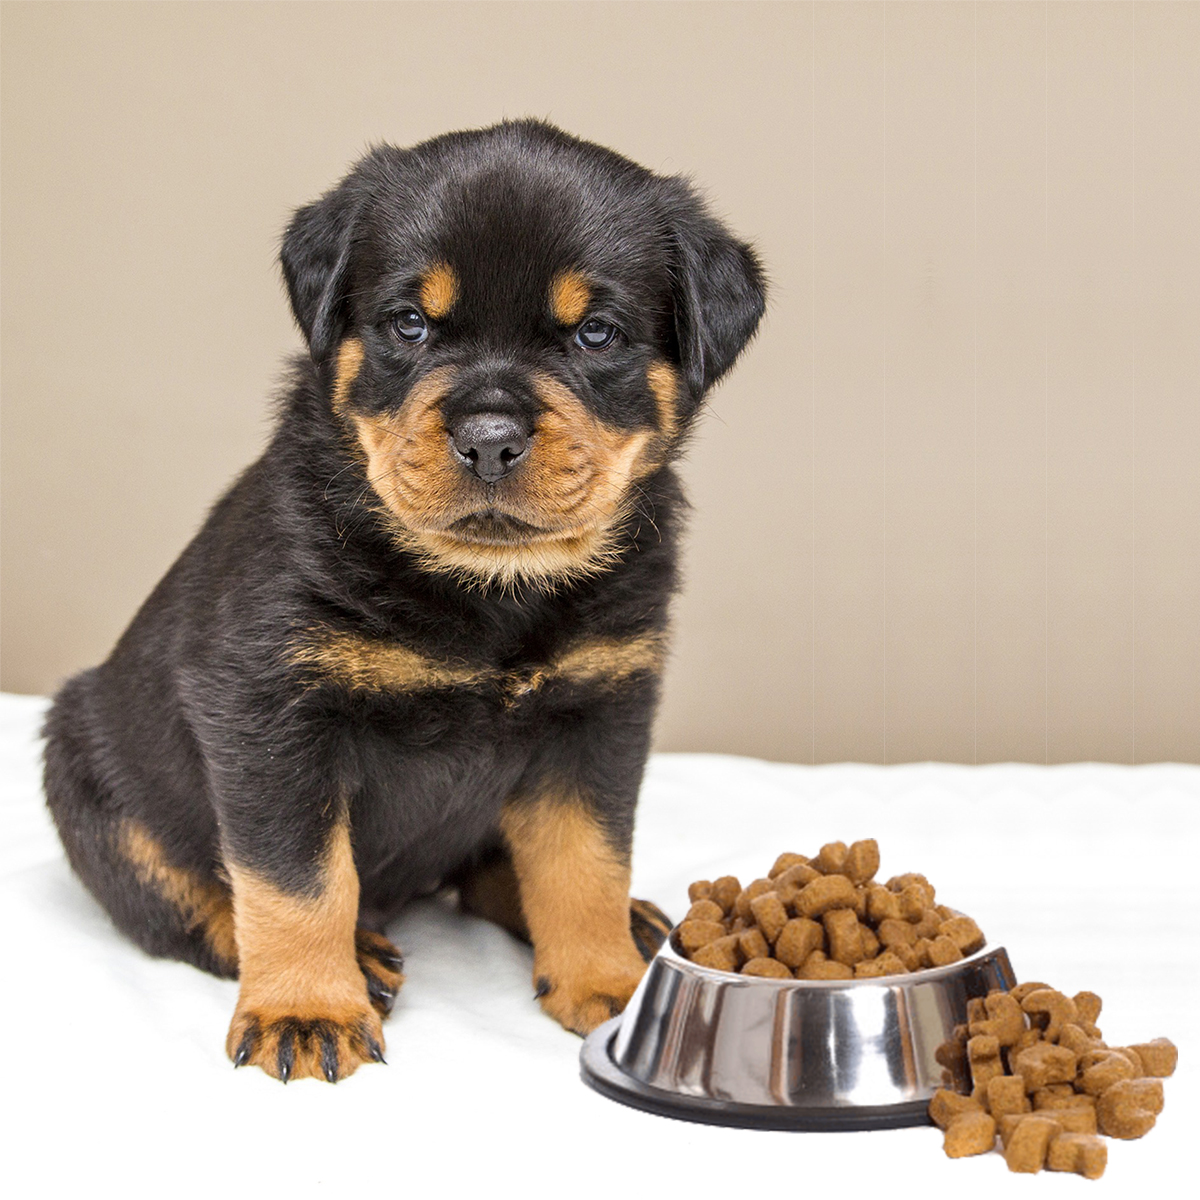 Rottweiler Puppies For Sale – How Much They Cost & Why?